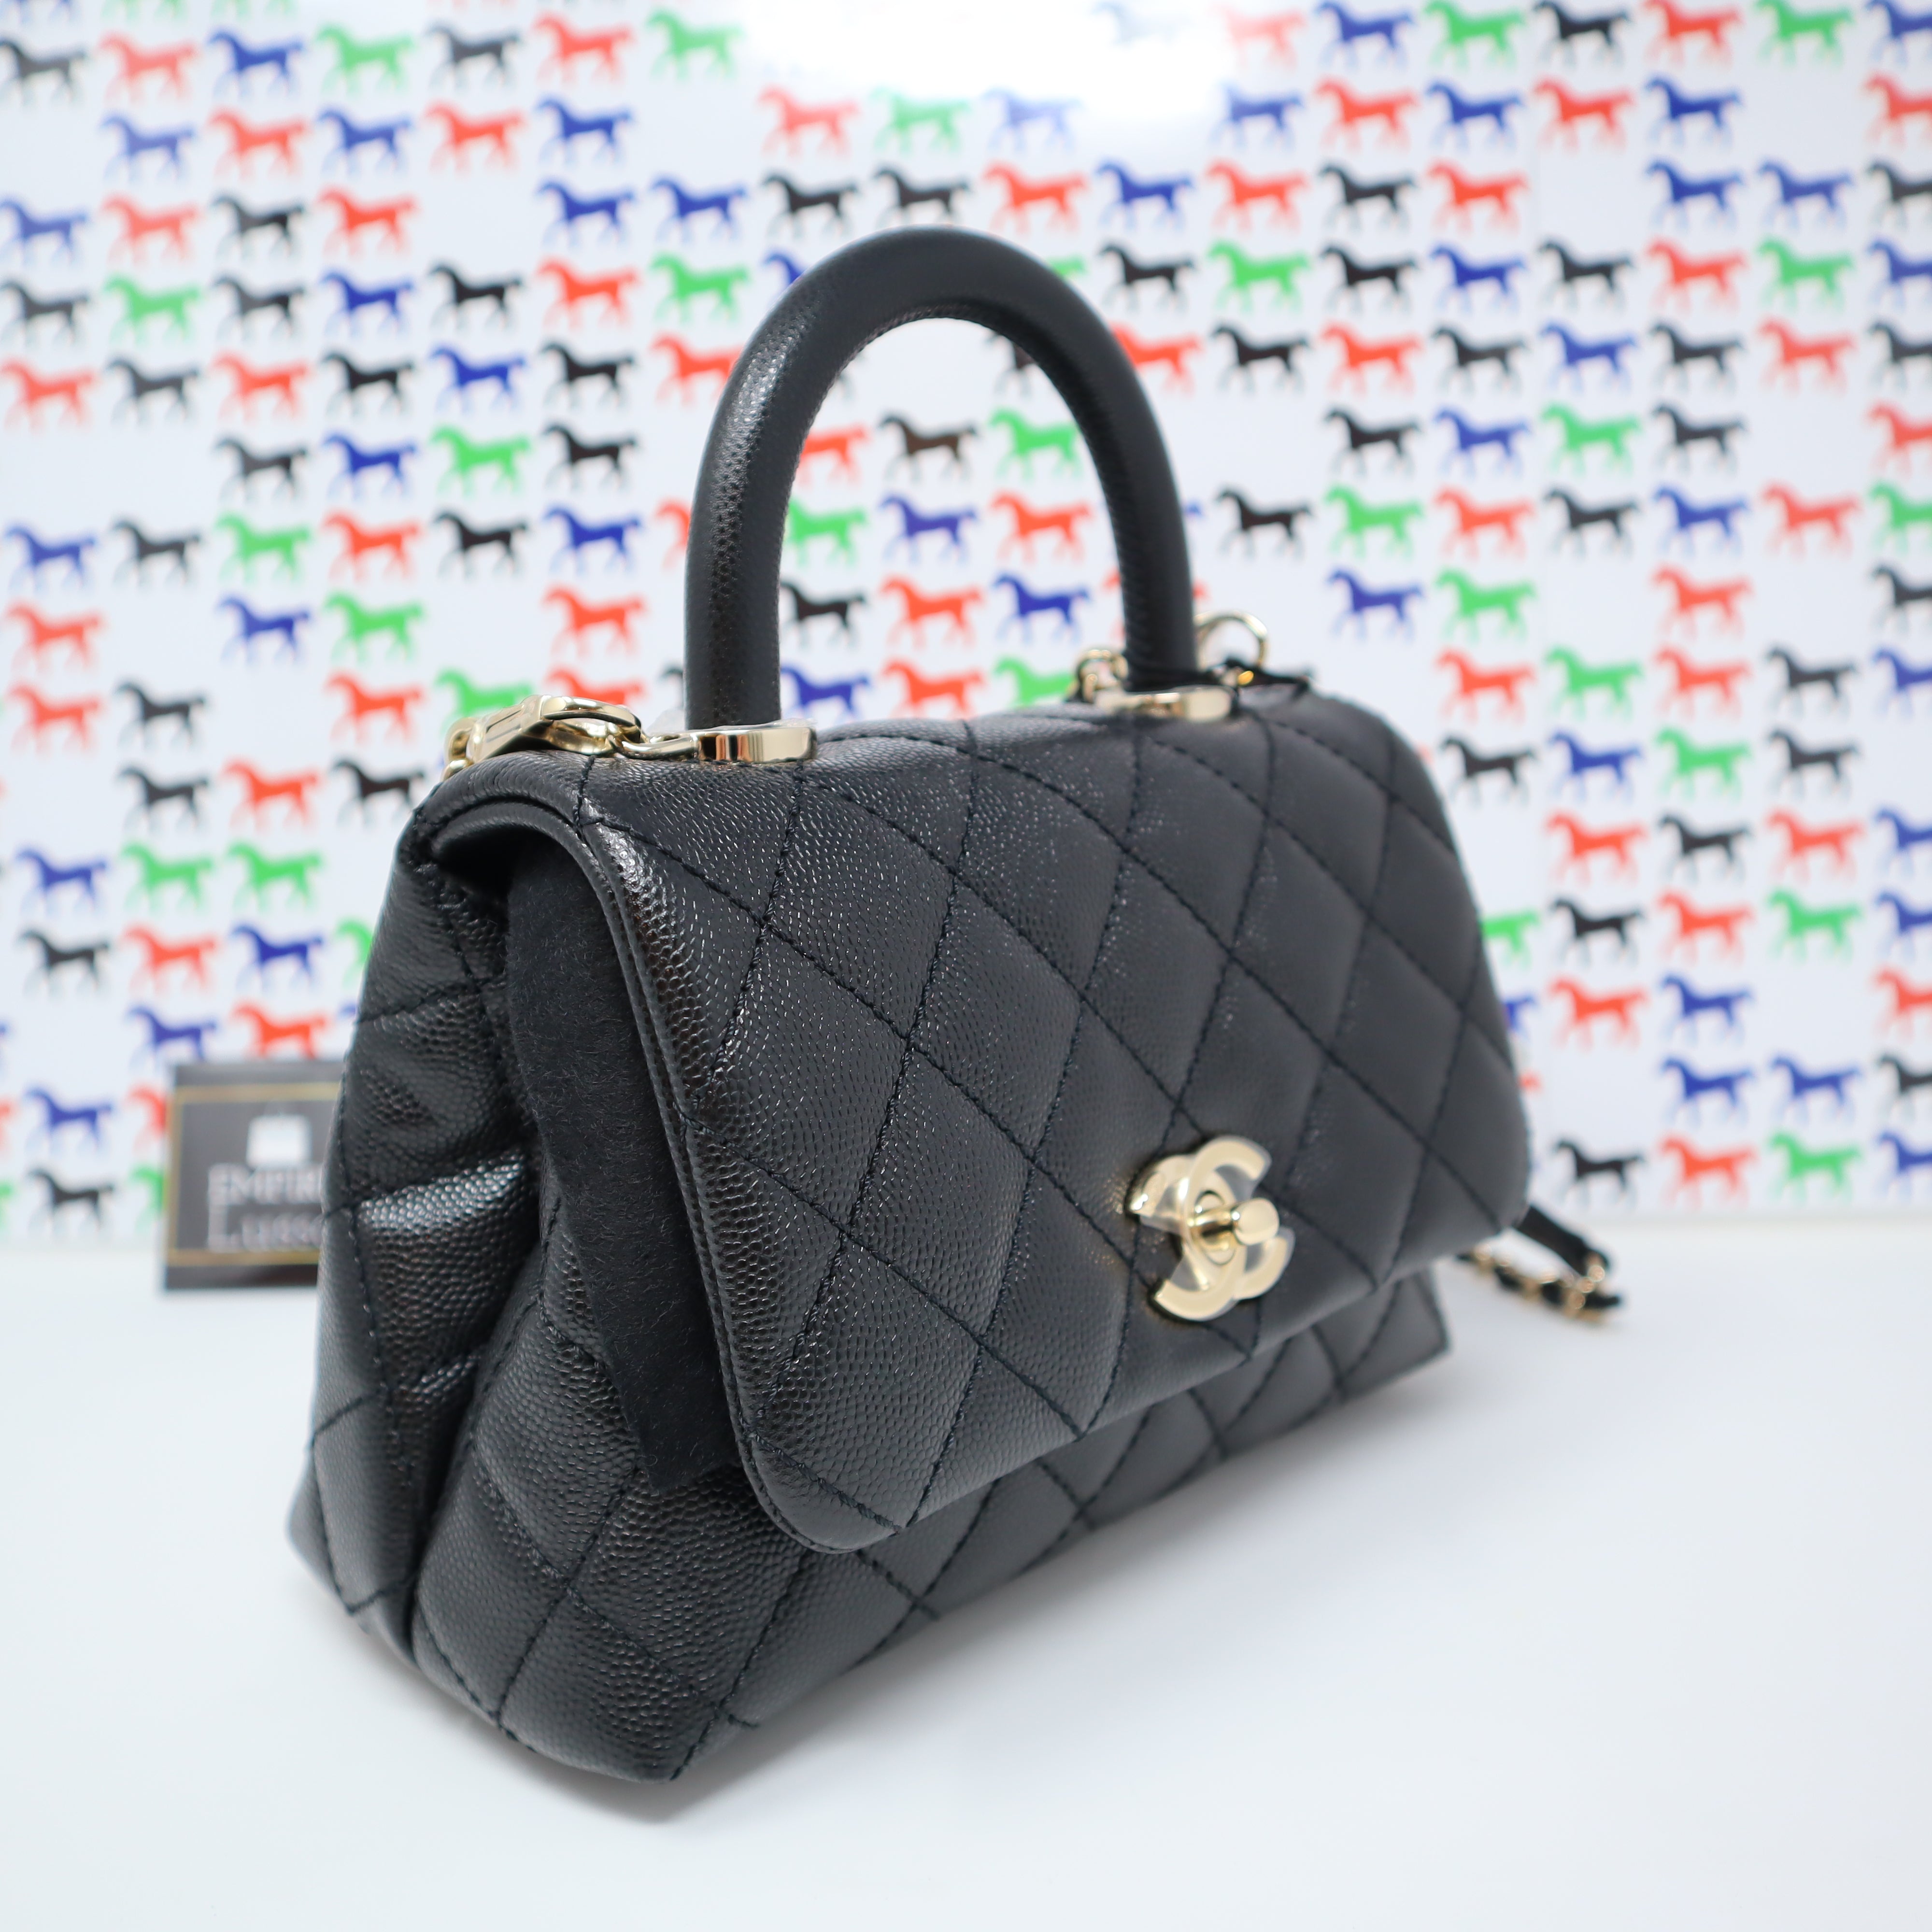 CHANEL, Bags, Chanel Coco Handle Bag Quilted Caviar Extra Mini Iridescent  Blue Rainbow Hw